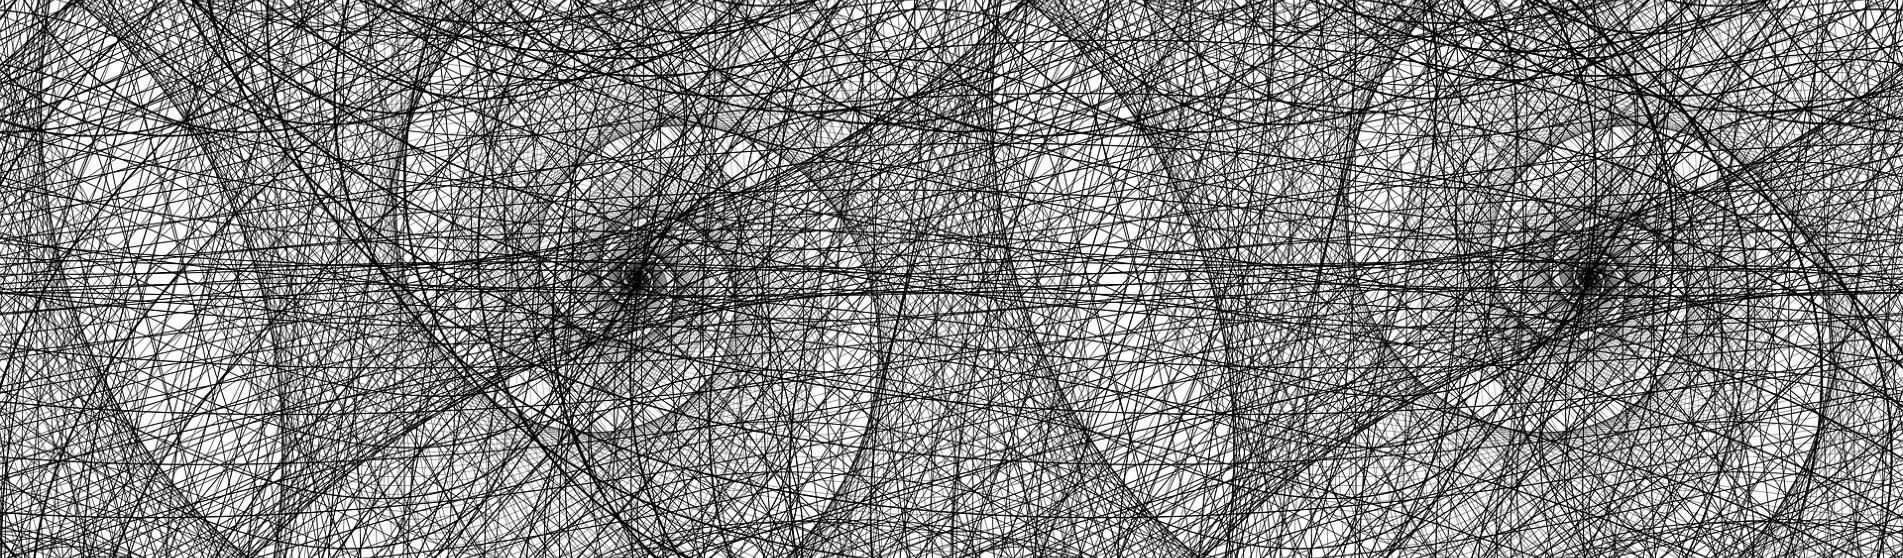 Monochrome abstract design depicting a network